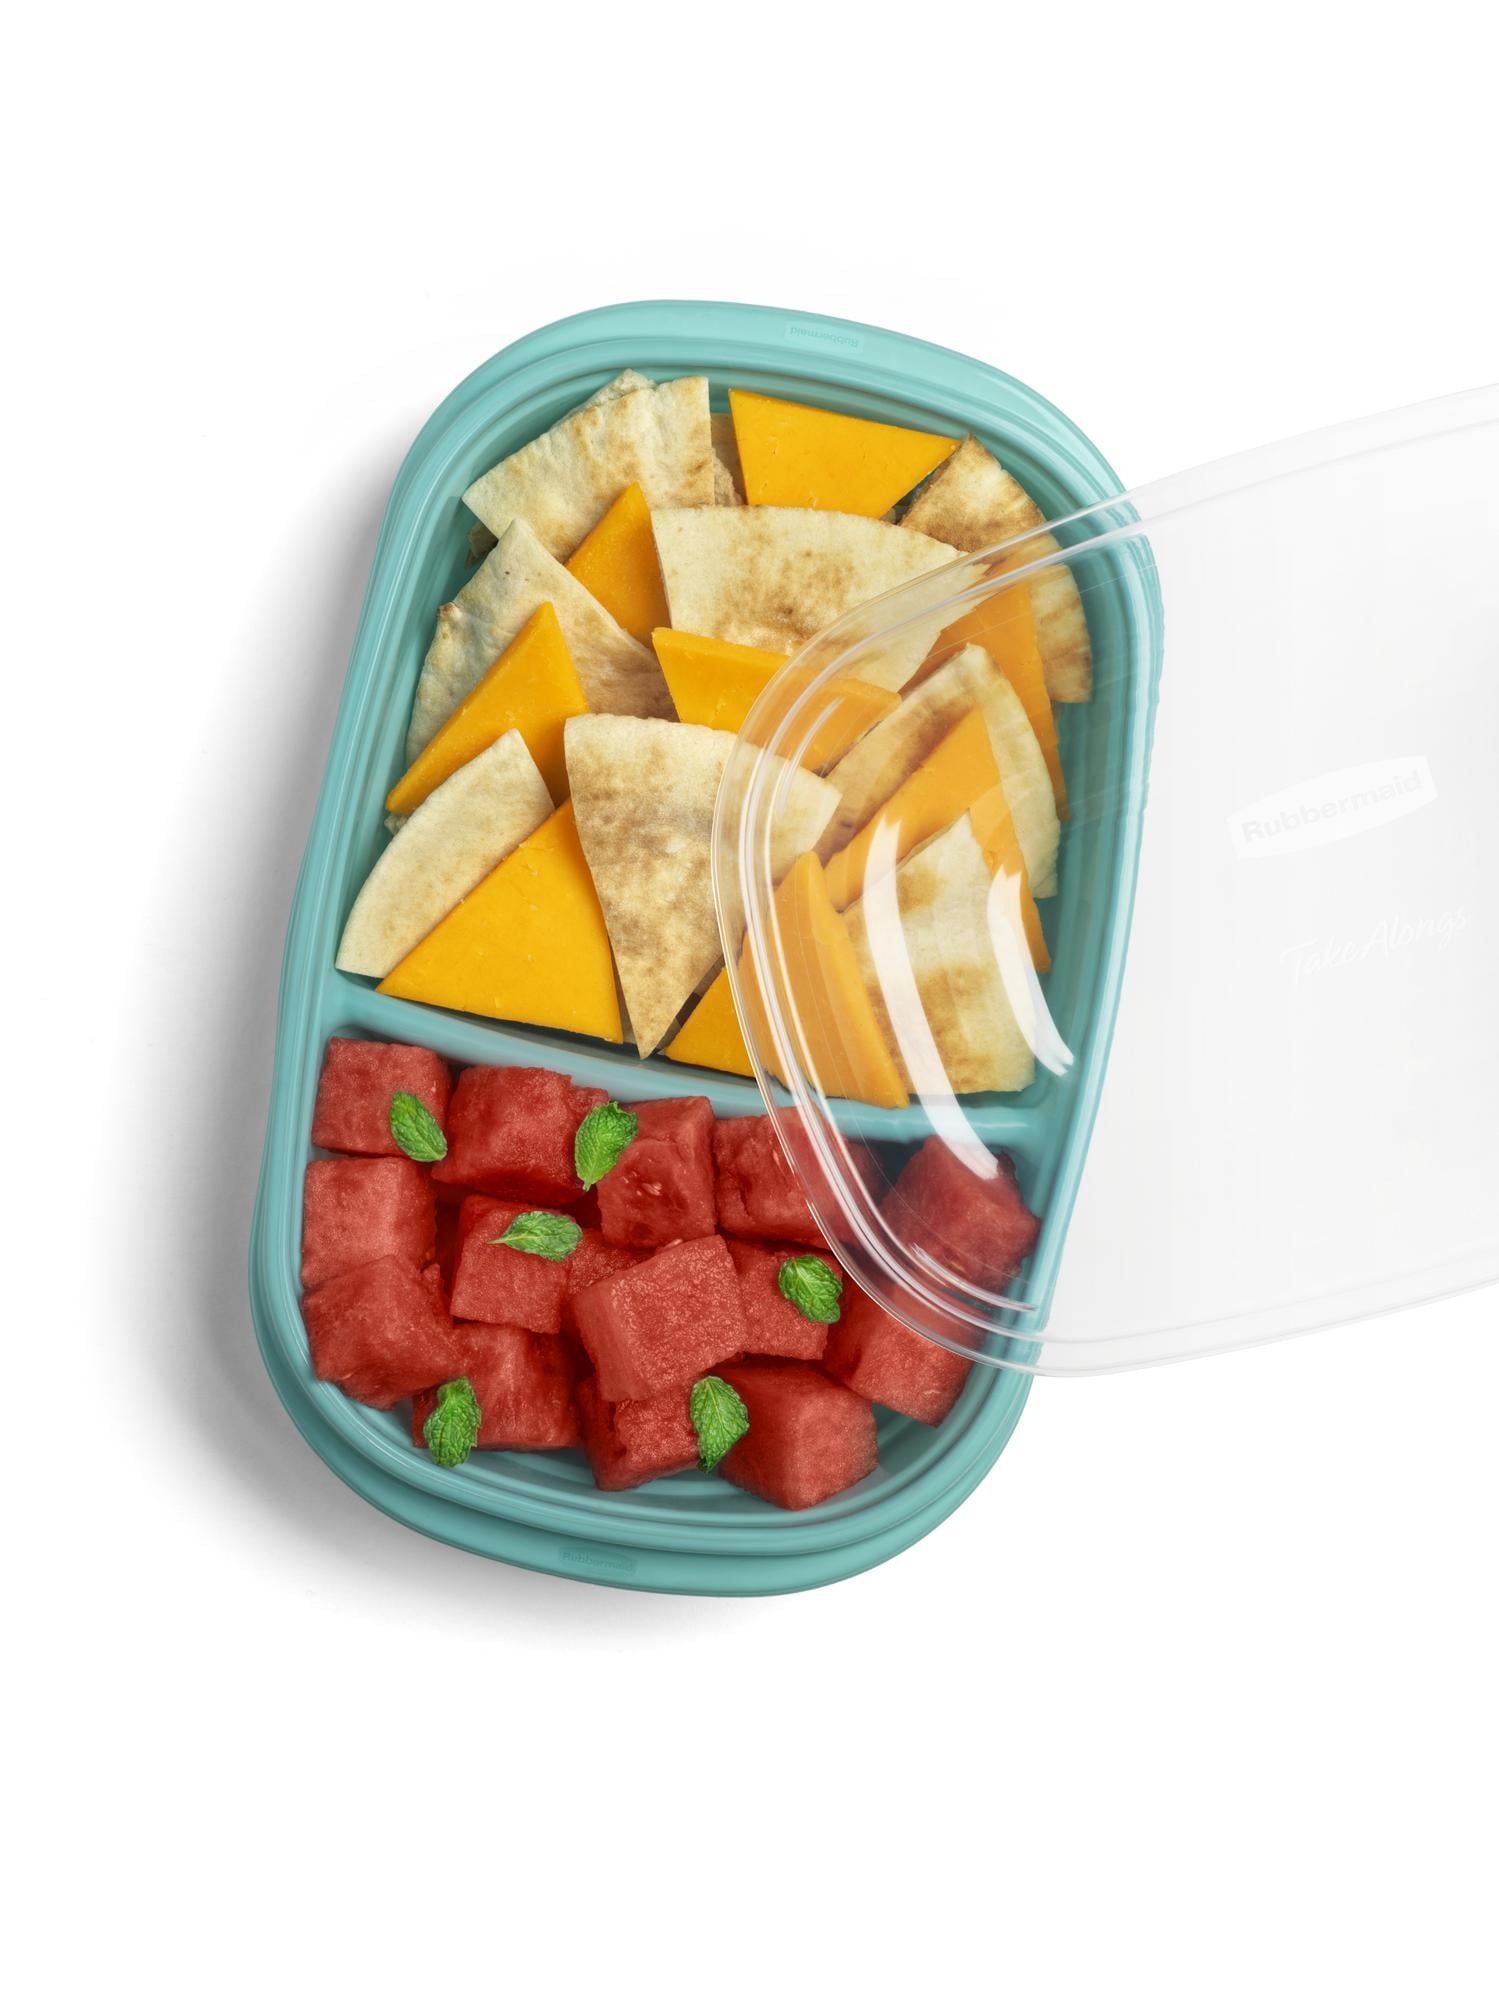 20-Piece TakeAlongs Meal Prep Containers